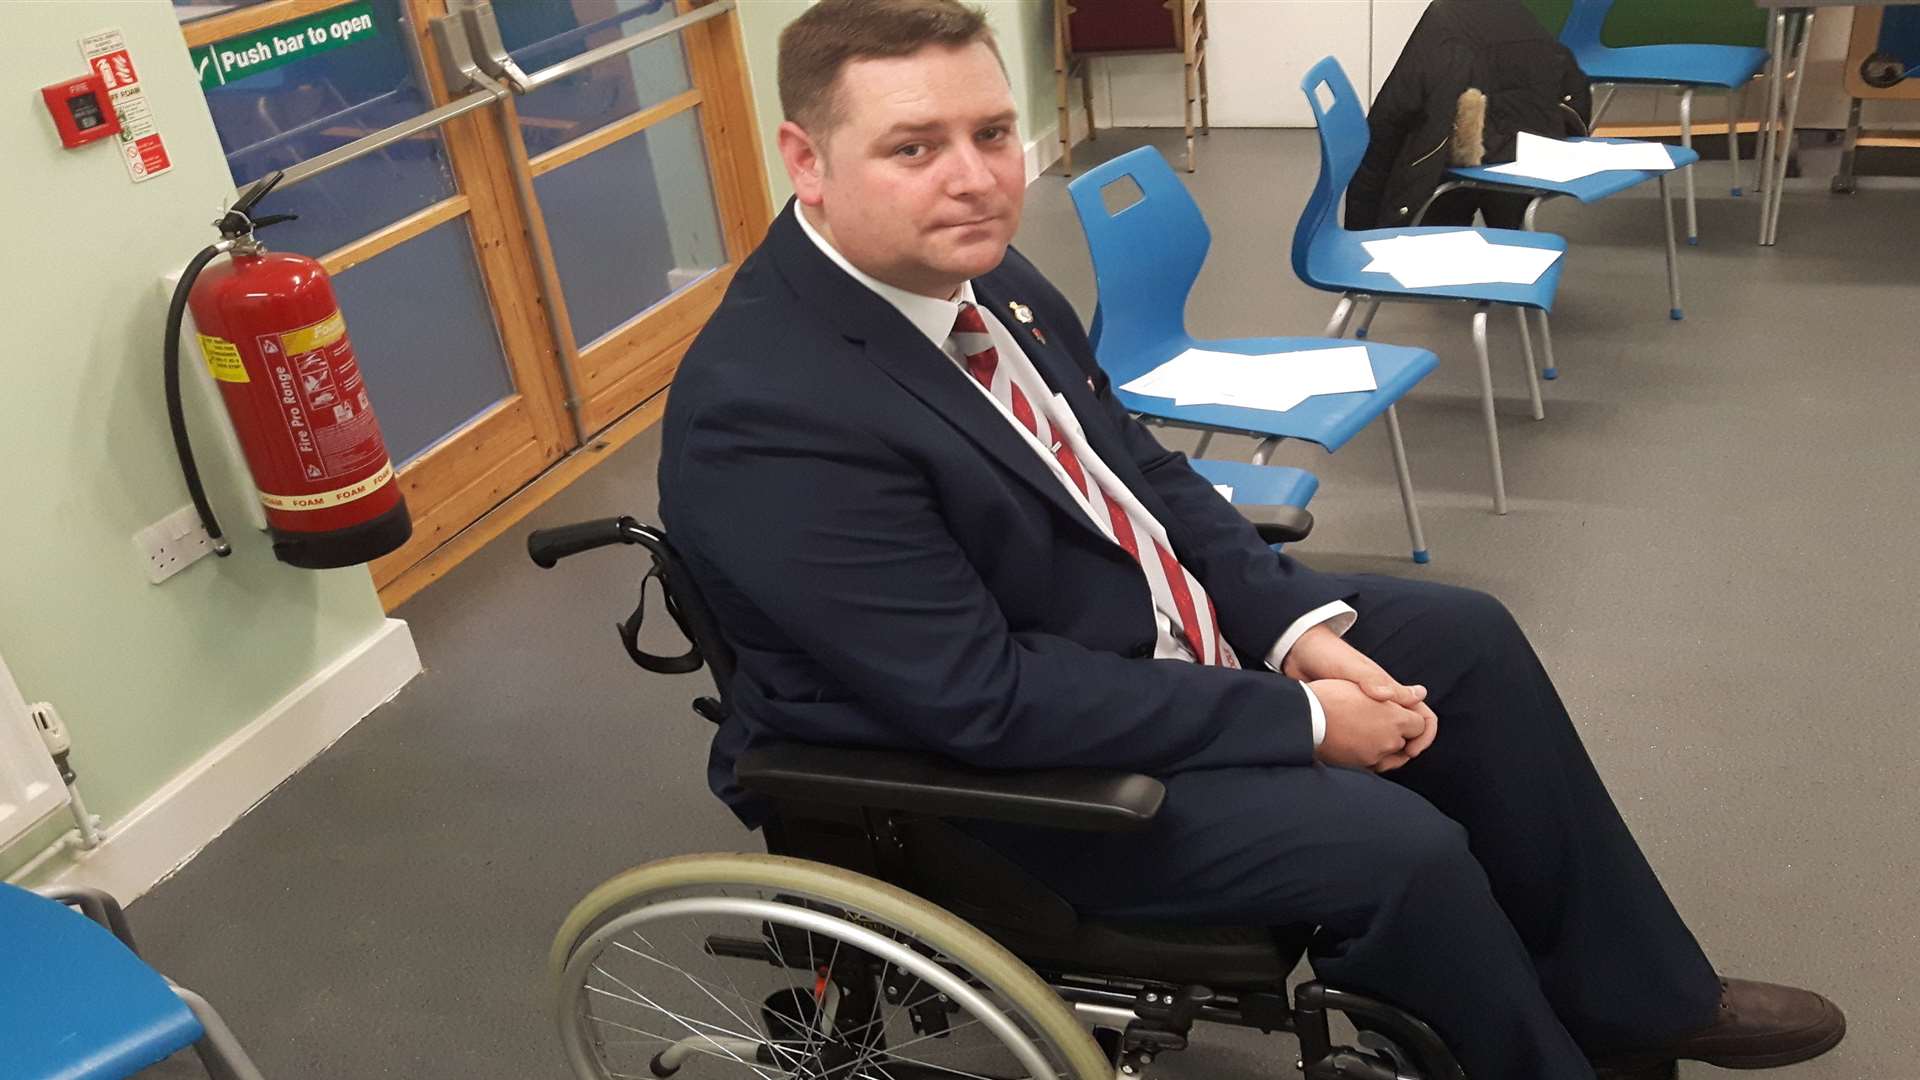 Cllr Ian Palmer: Life after disability